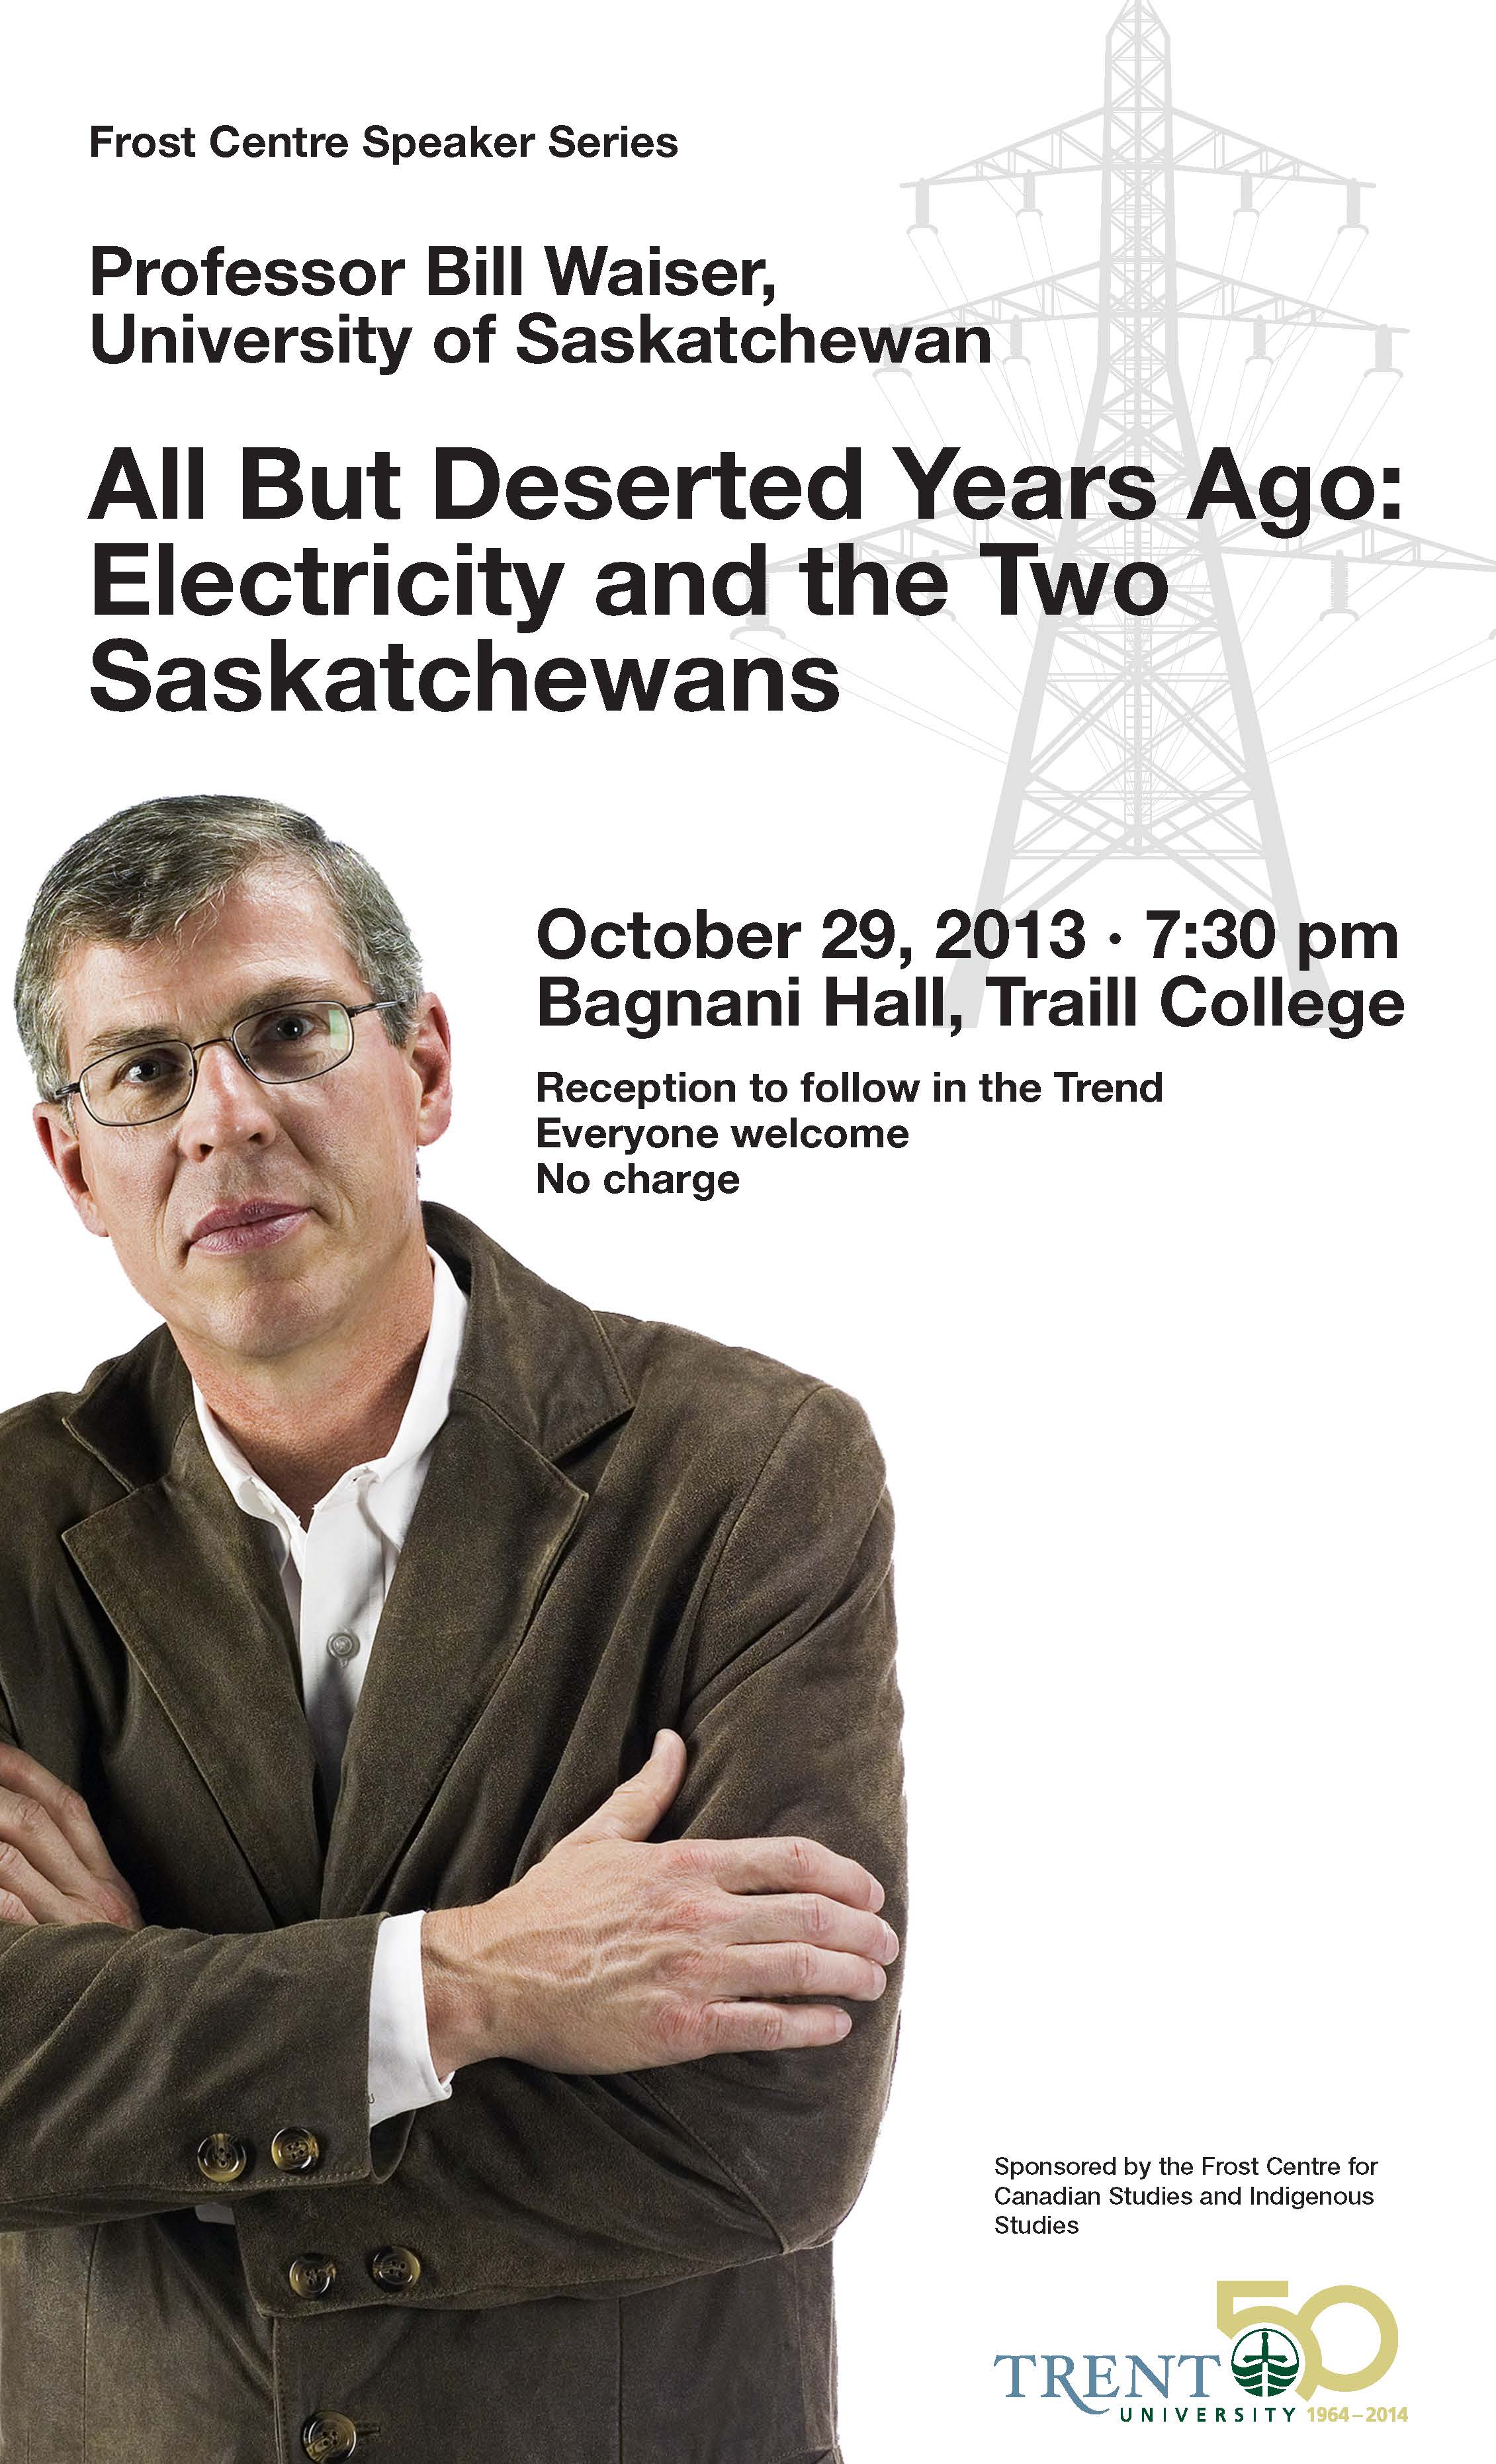 "All But Deserted Years Ago: Electricity and the Saskatchewans" with Bill Waiser 29 October 2013